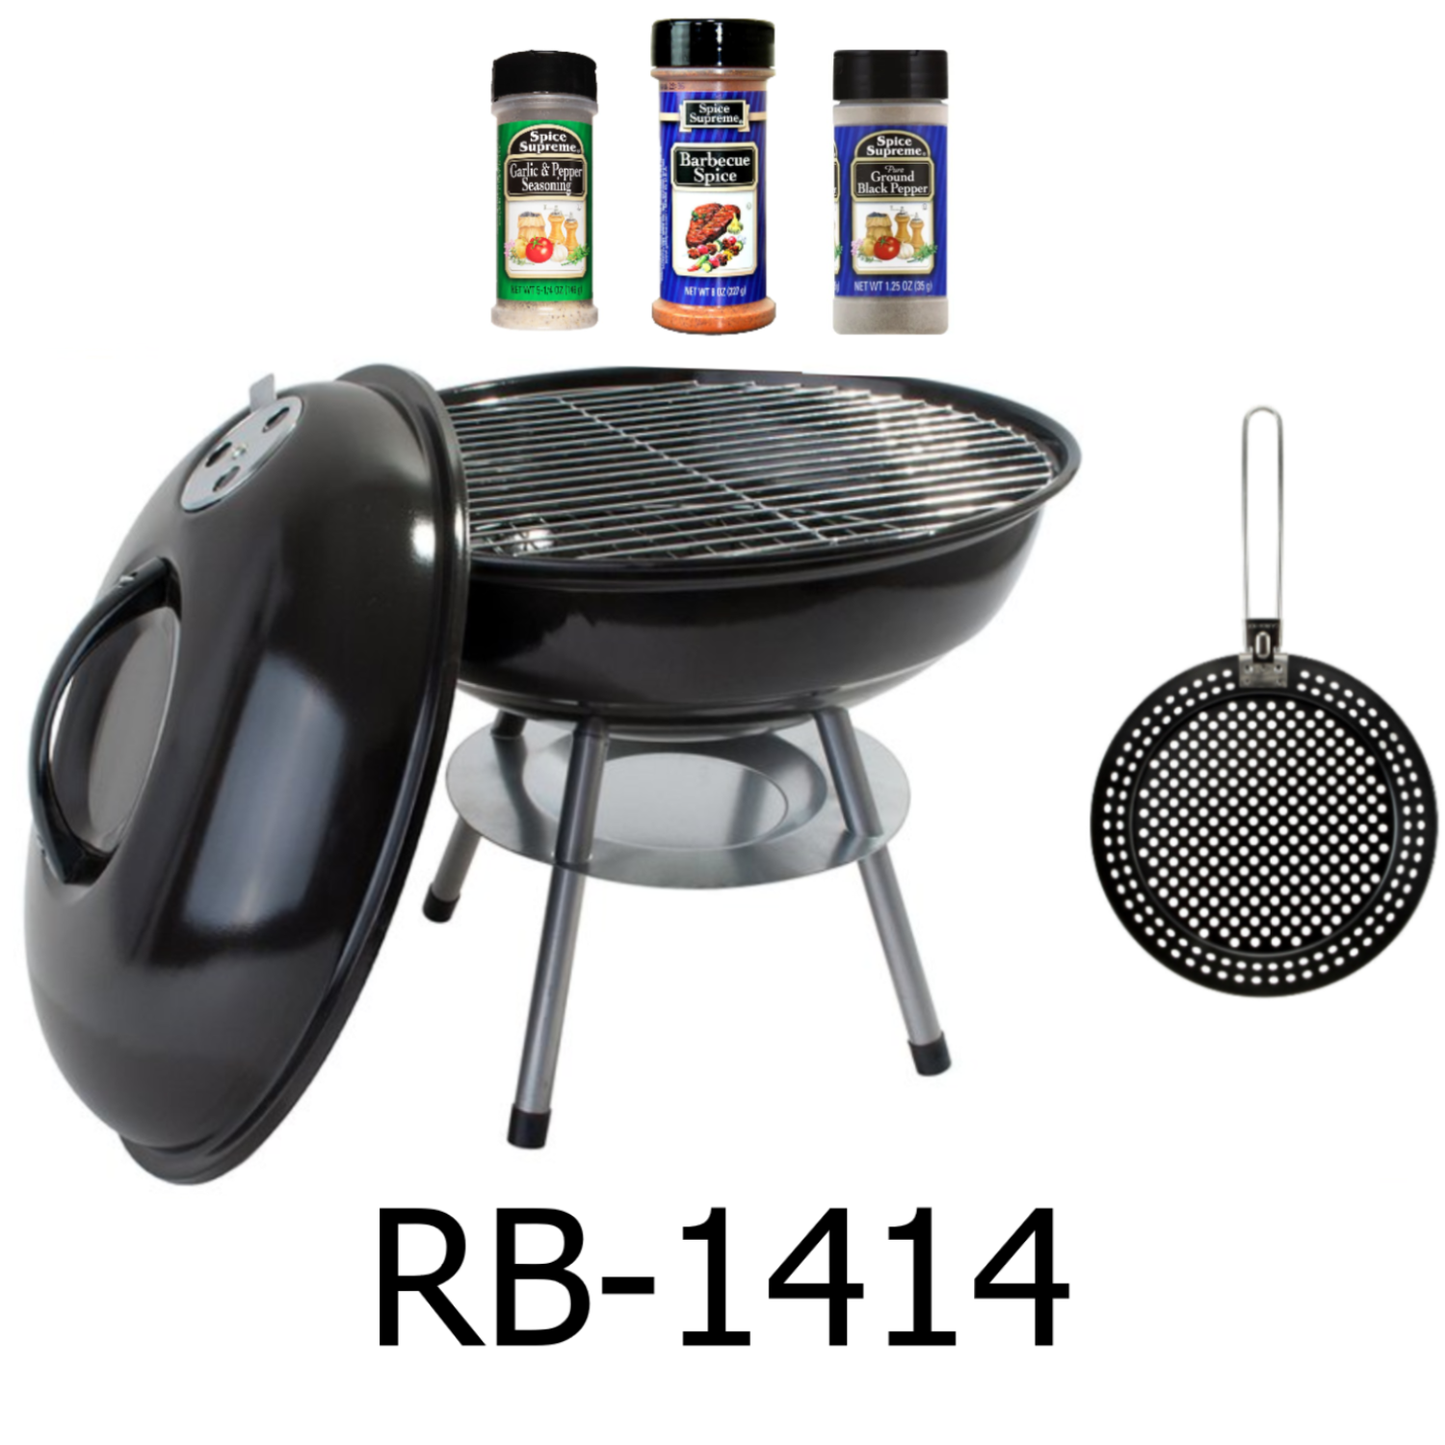 14” Round Portable BBQ Grill Set (Free Gifts: Grilling Skillet & 3 Spices)